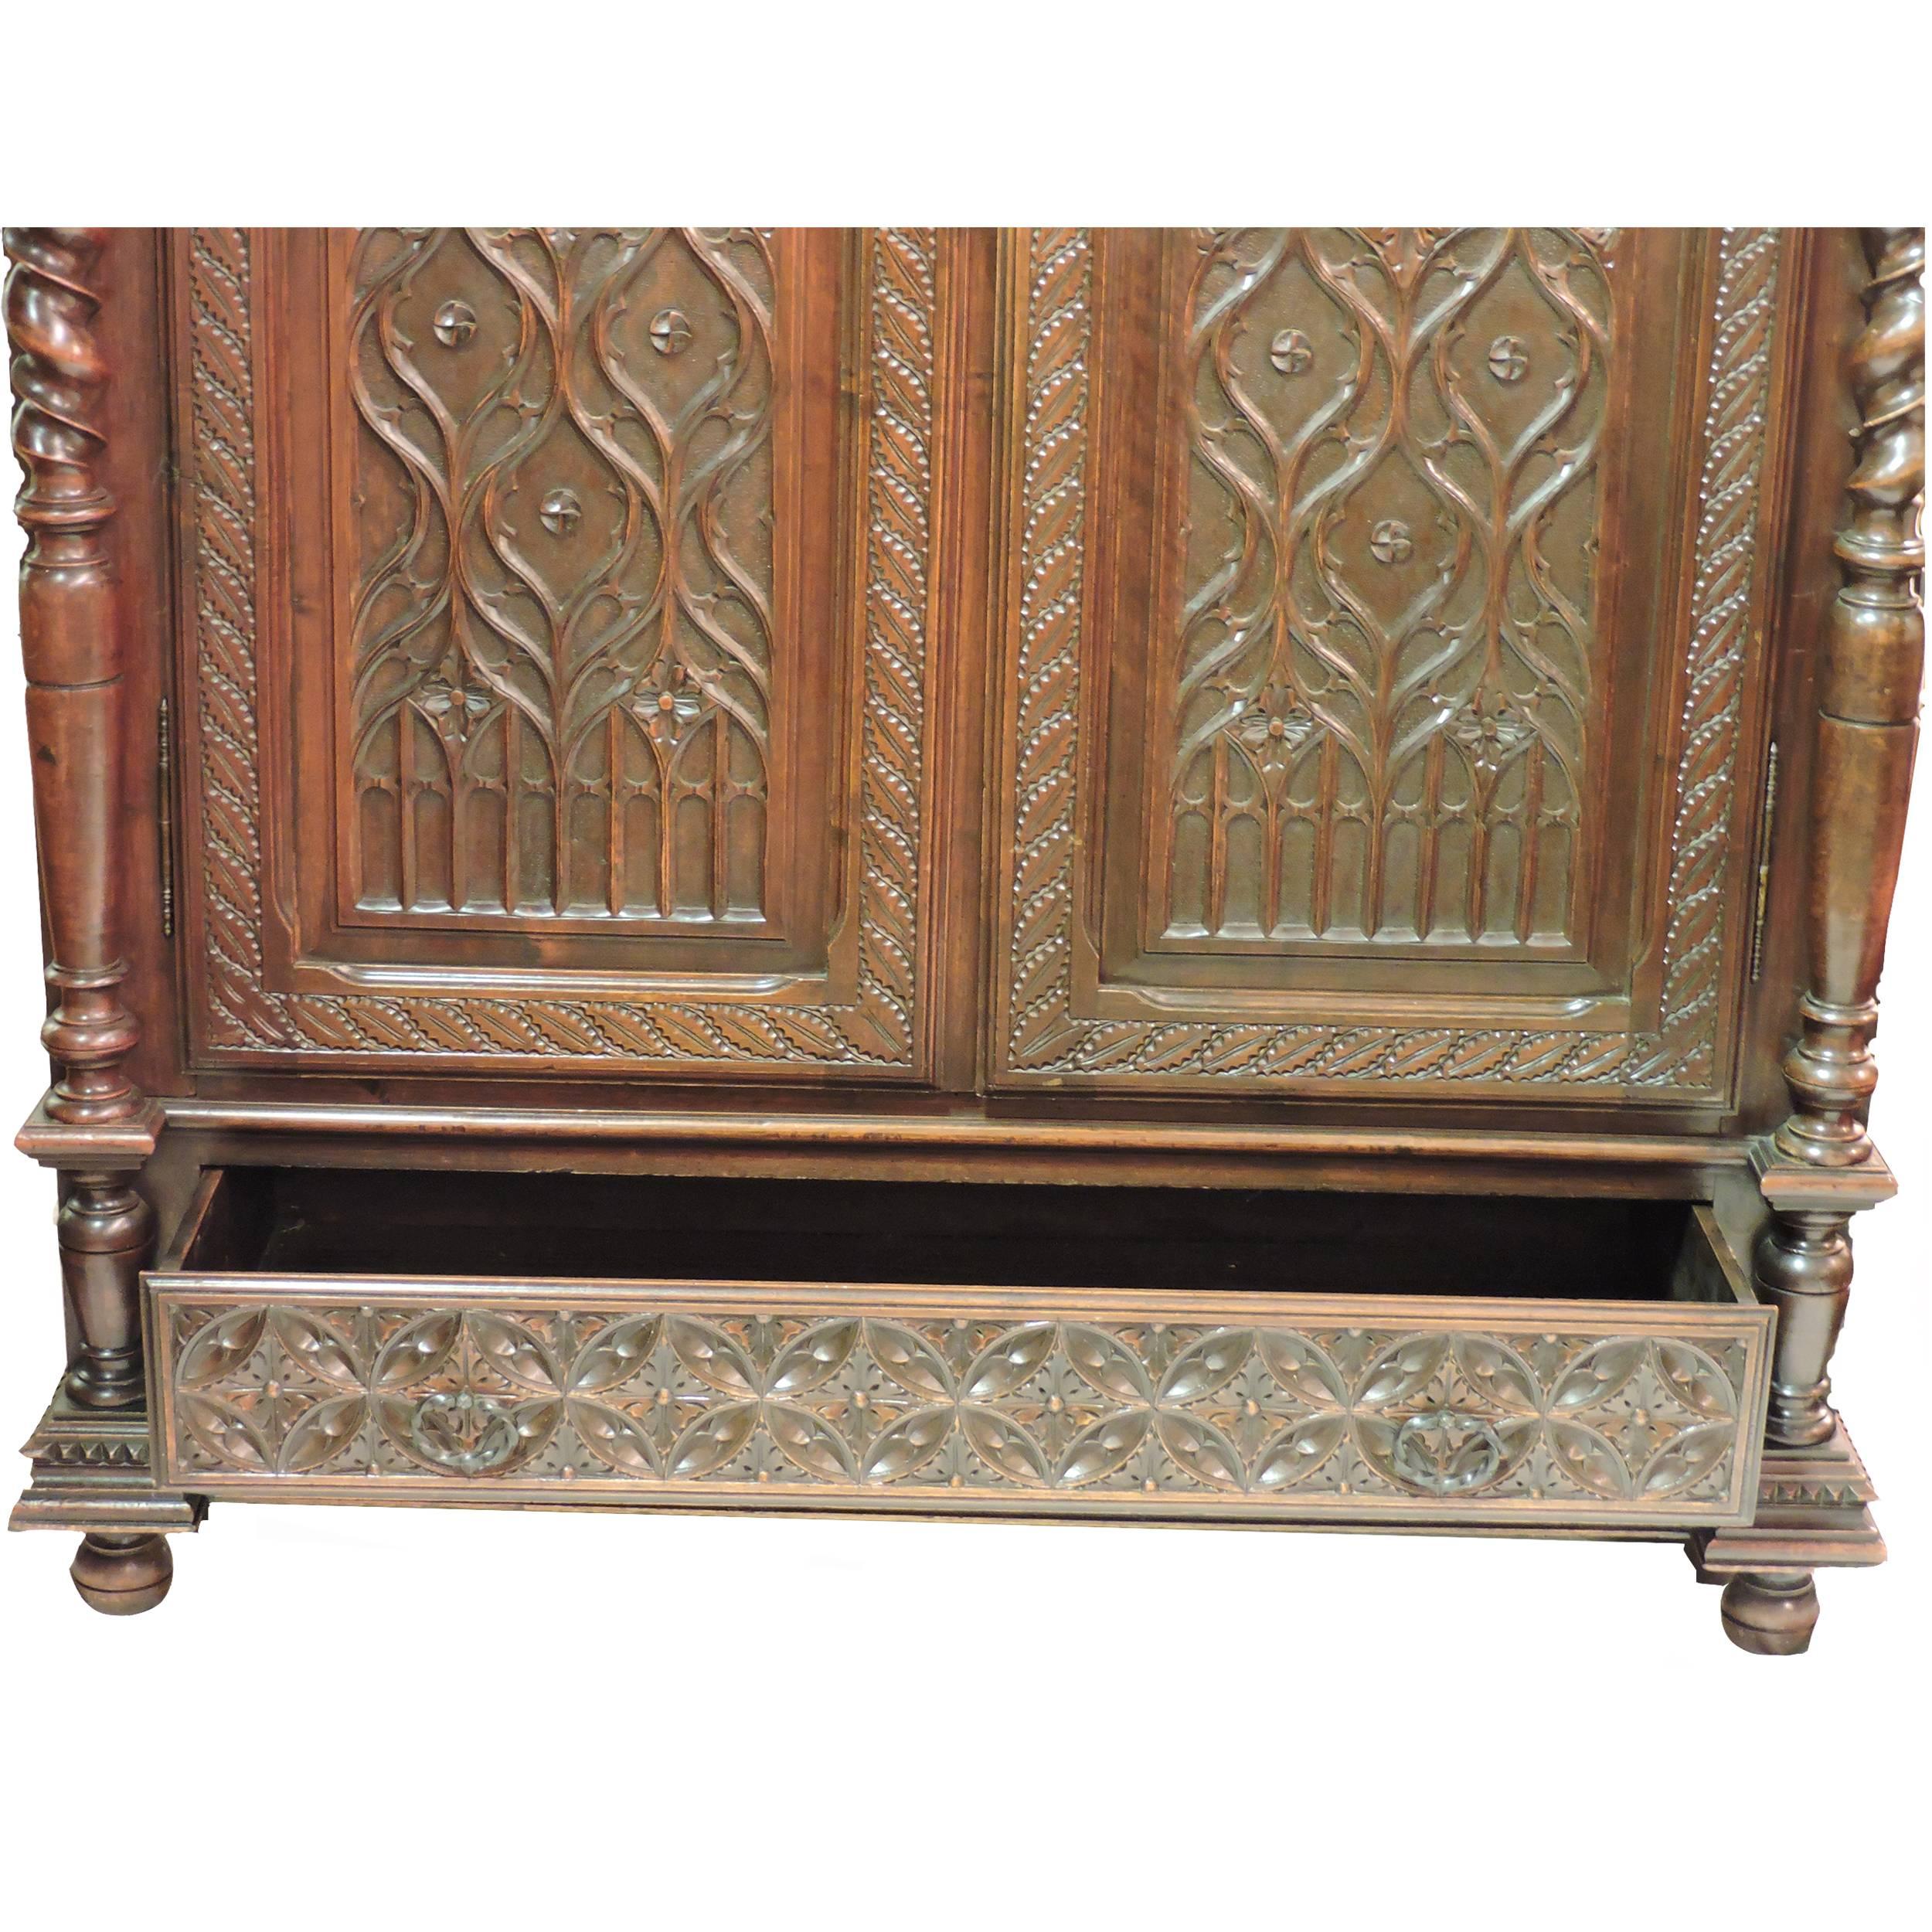 Solid Walnut Gothic Style Armoire In Good Condition For Sale In Baton Rouge, LA